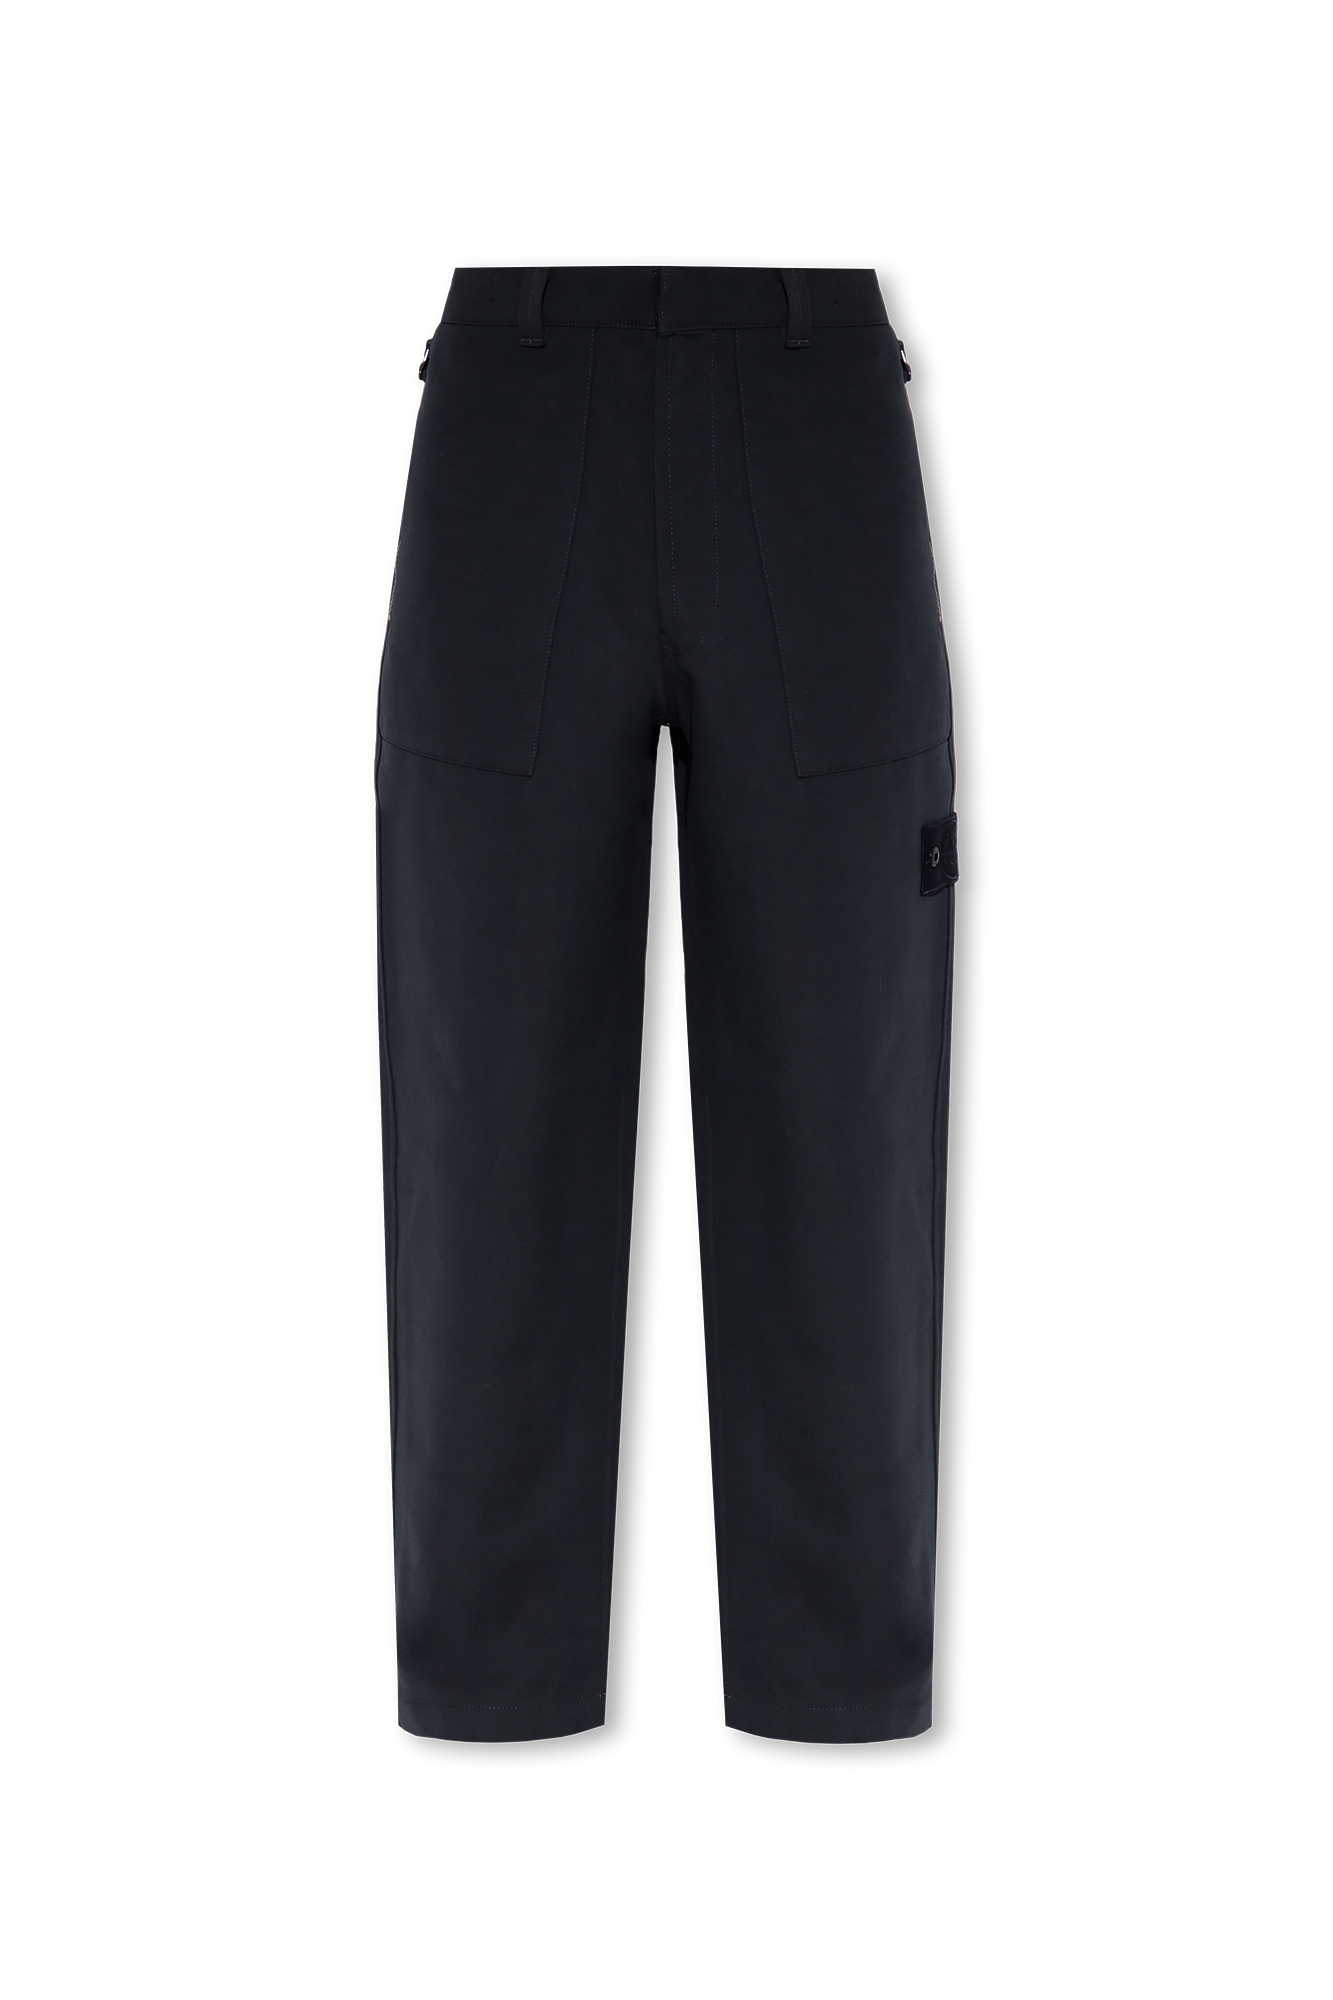 Comfy pants when we need them - GenesinlifeShops Germany - Navy